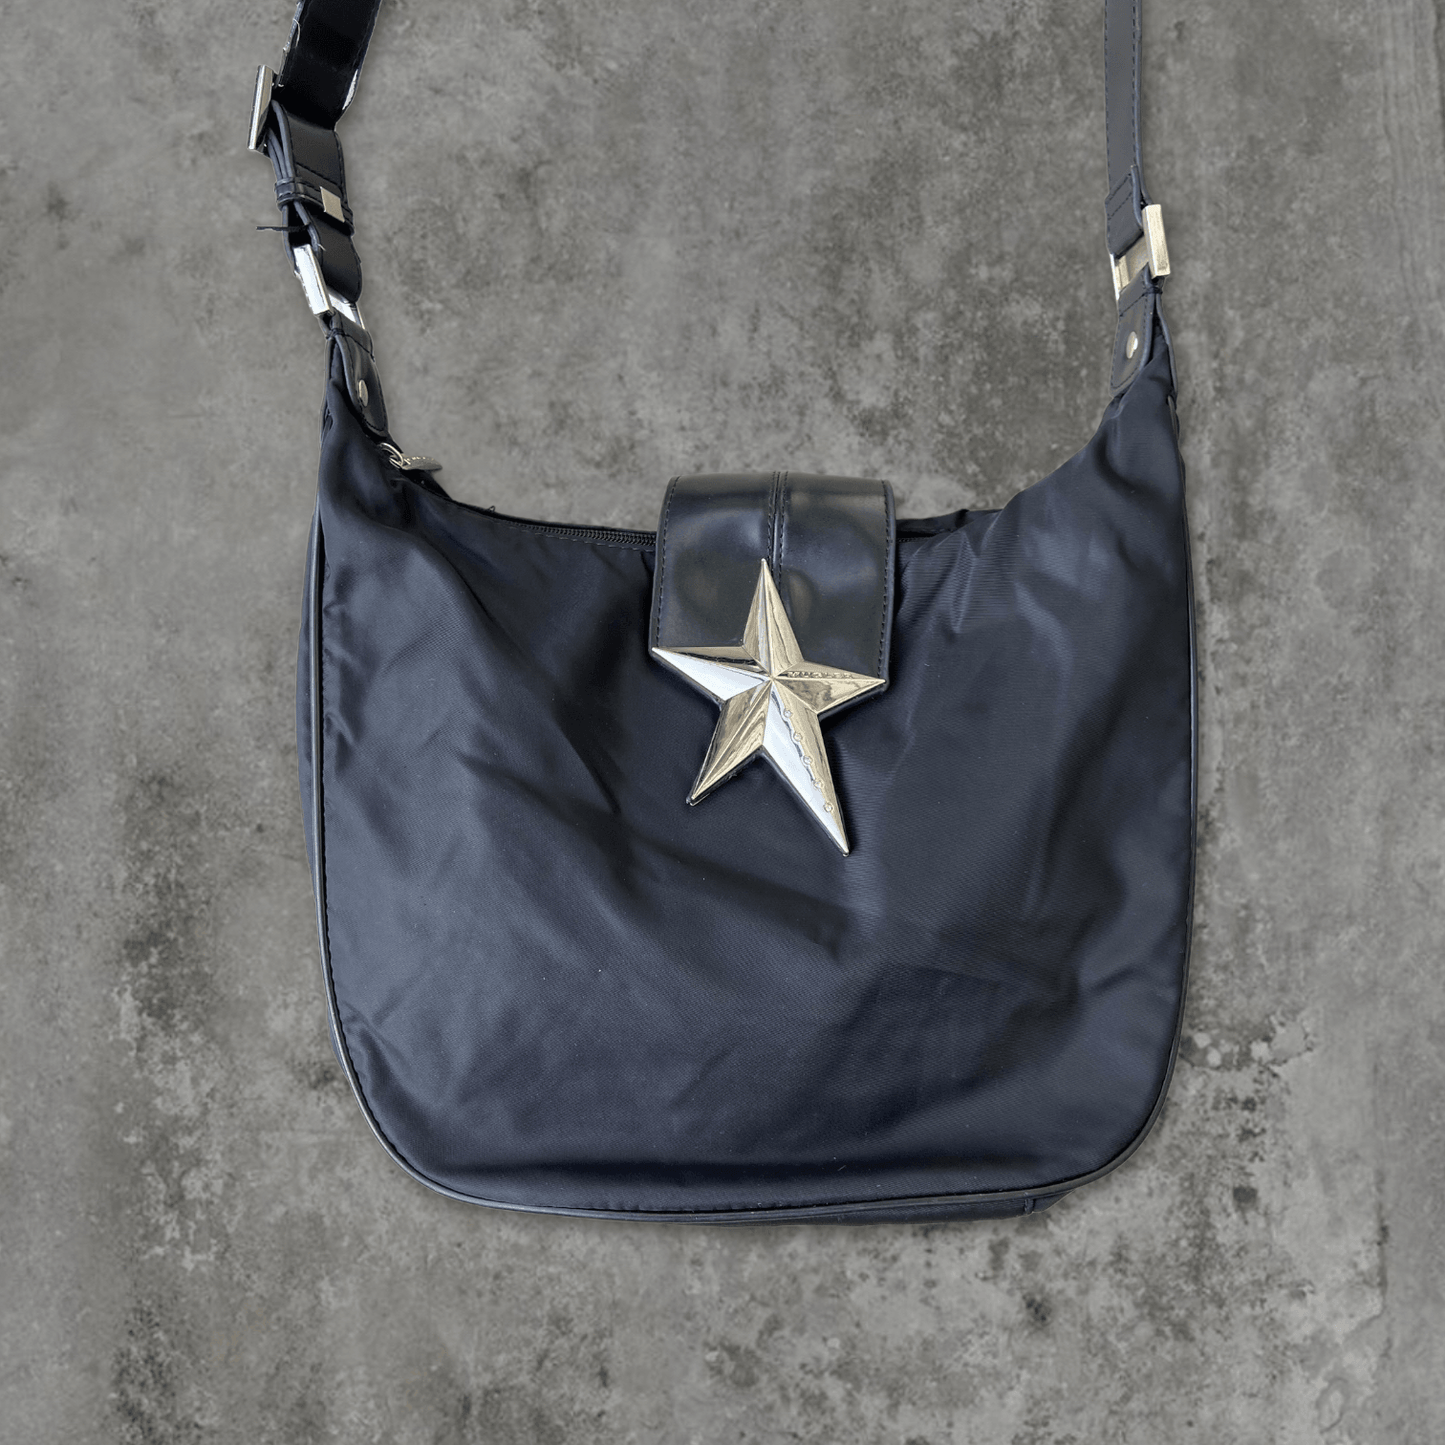 THIERRY MUGLER CHROME STAR SIDE BAG - Known Source